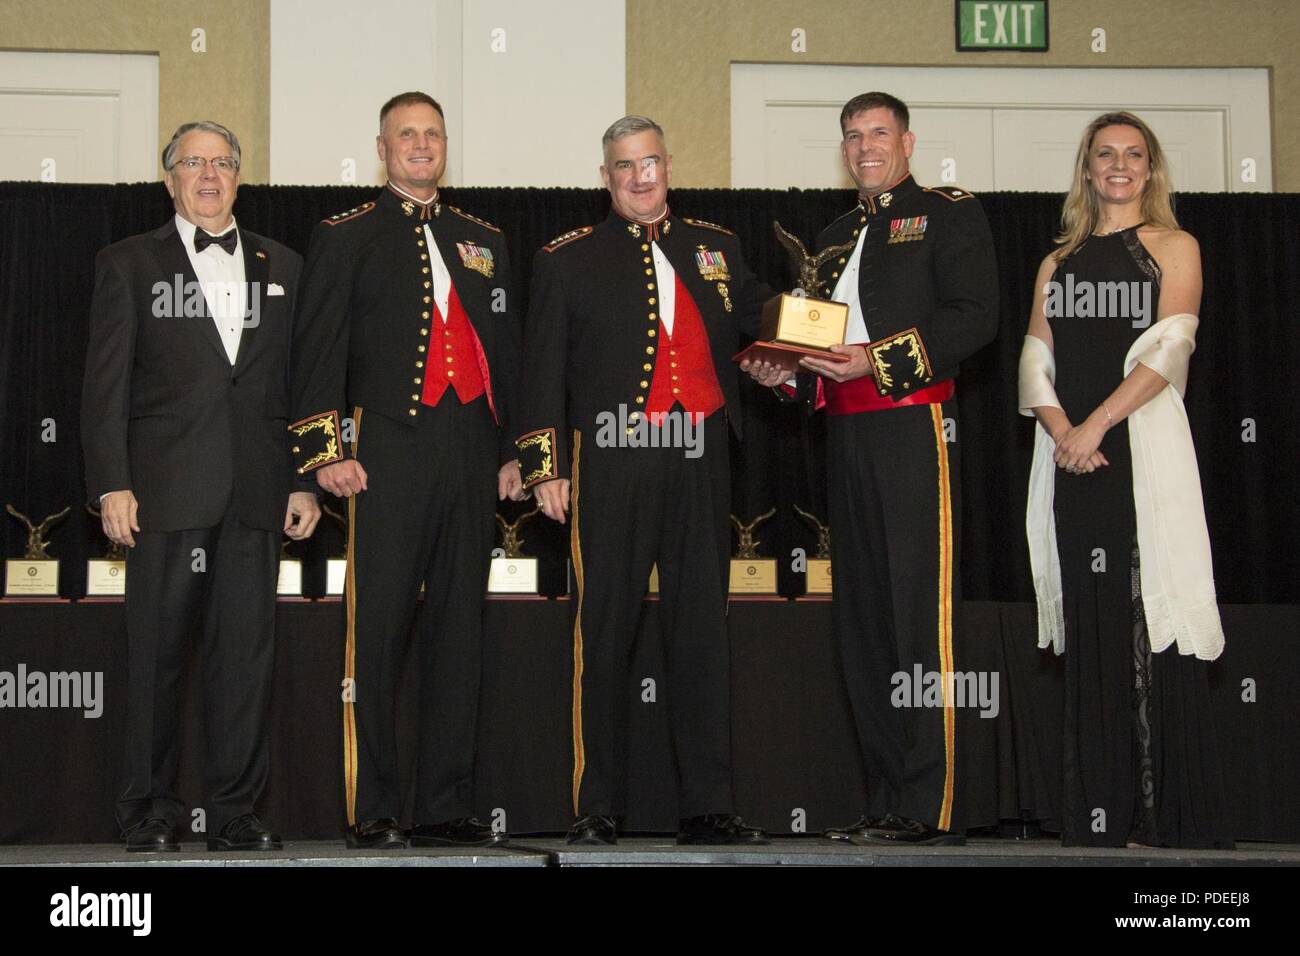 The Assistant Commandant of the Marine Corps Gen. Glenn M. Walters, middle, presents the John I. Hudson Award for Marine Unmanned Aerial Vehicle Squadron of the Year to representatives from Marine Unmanned Aerial Vehicle Squadron 3 (VMU-3), Marine Aircraft Group 24 (MAG-24) during the 47th annual Marine Corps Aviation Association (MCAA) Symposium and Awards Banquet, San Diego, Calif., May 18, 2018. Walters was the guest speaker for the event and presented 13 unit awards and 16 individual awards during the ceremony. Stock Photo